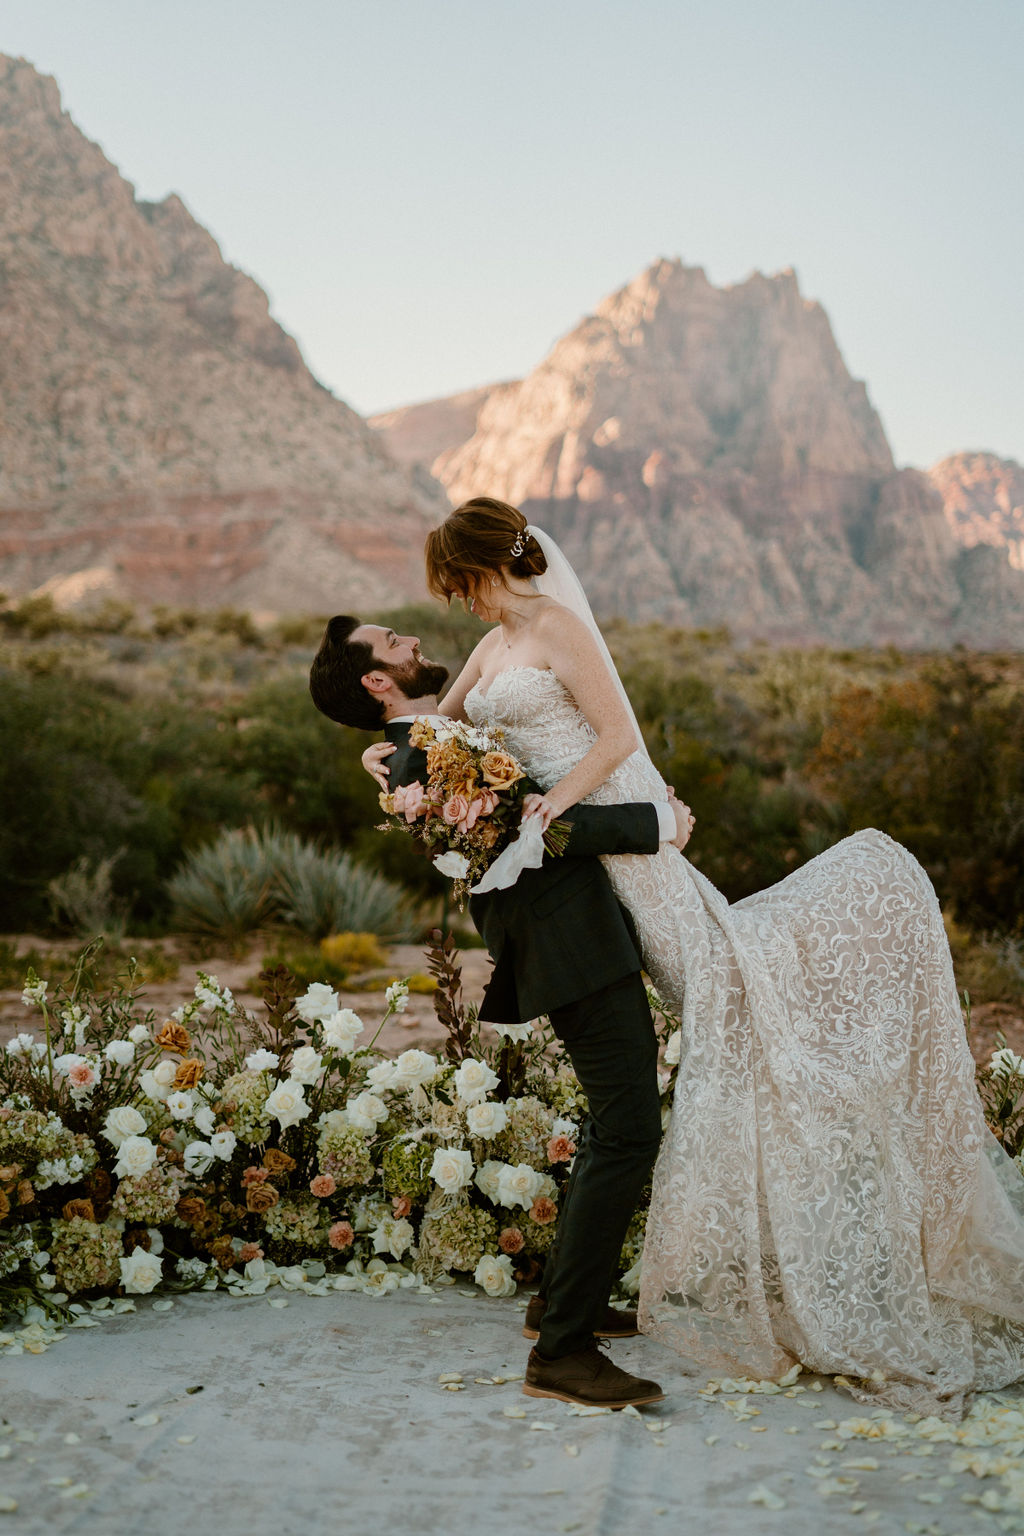 A wedding ceremony taking place outdoors, with a couple and officiant standing amid floral arrangements in a desert setting with a rugged mountain backdrop at Red Rock Canyon